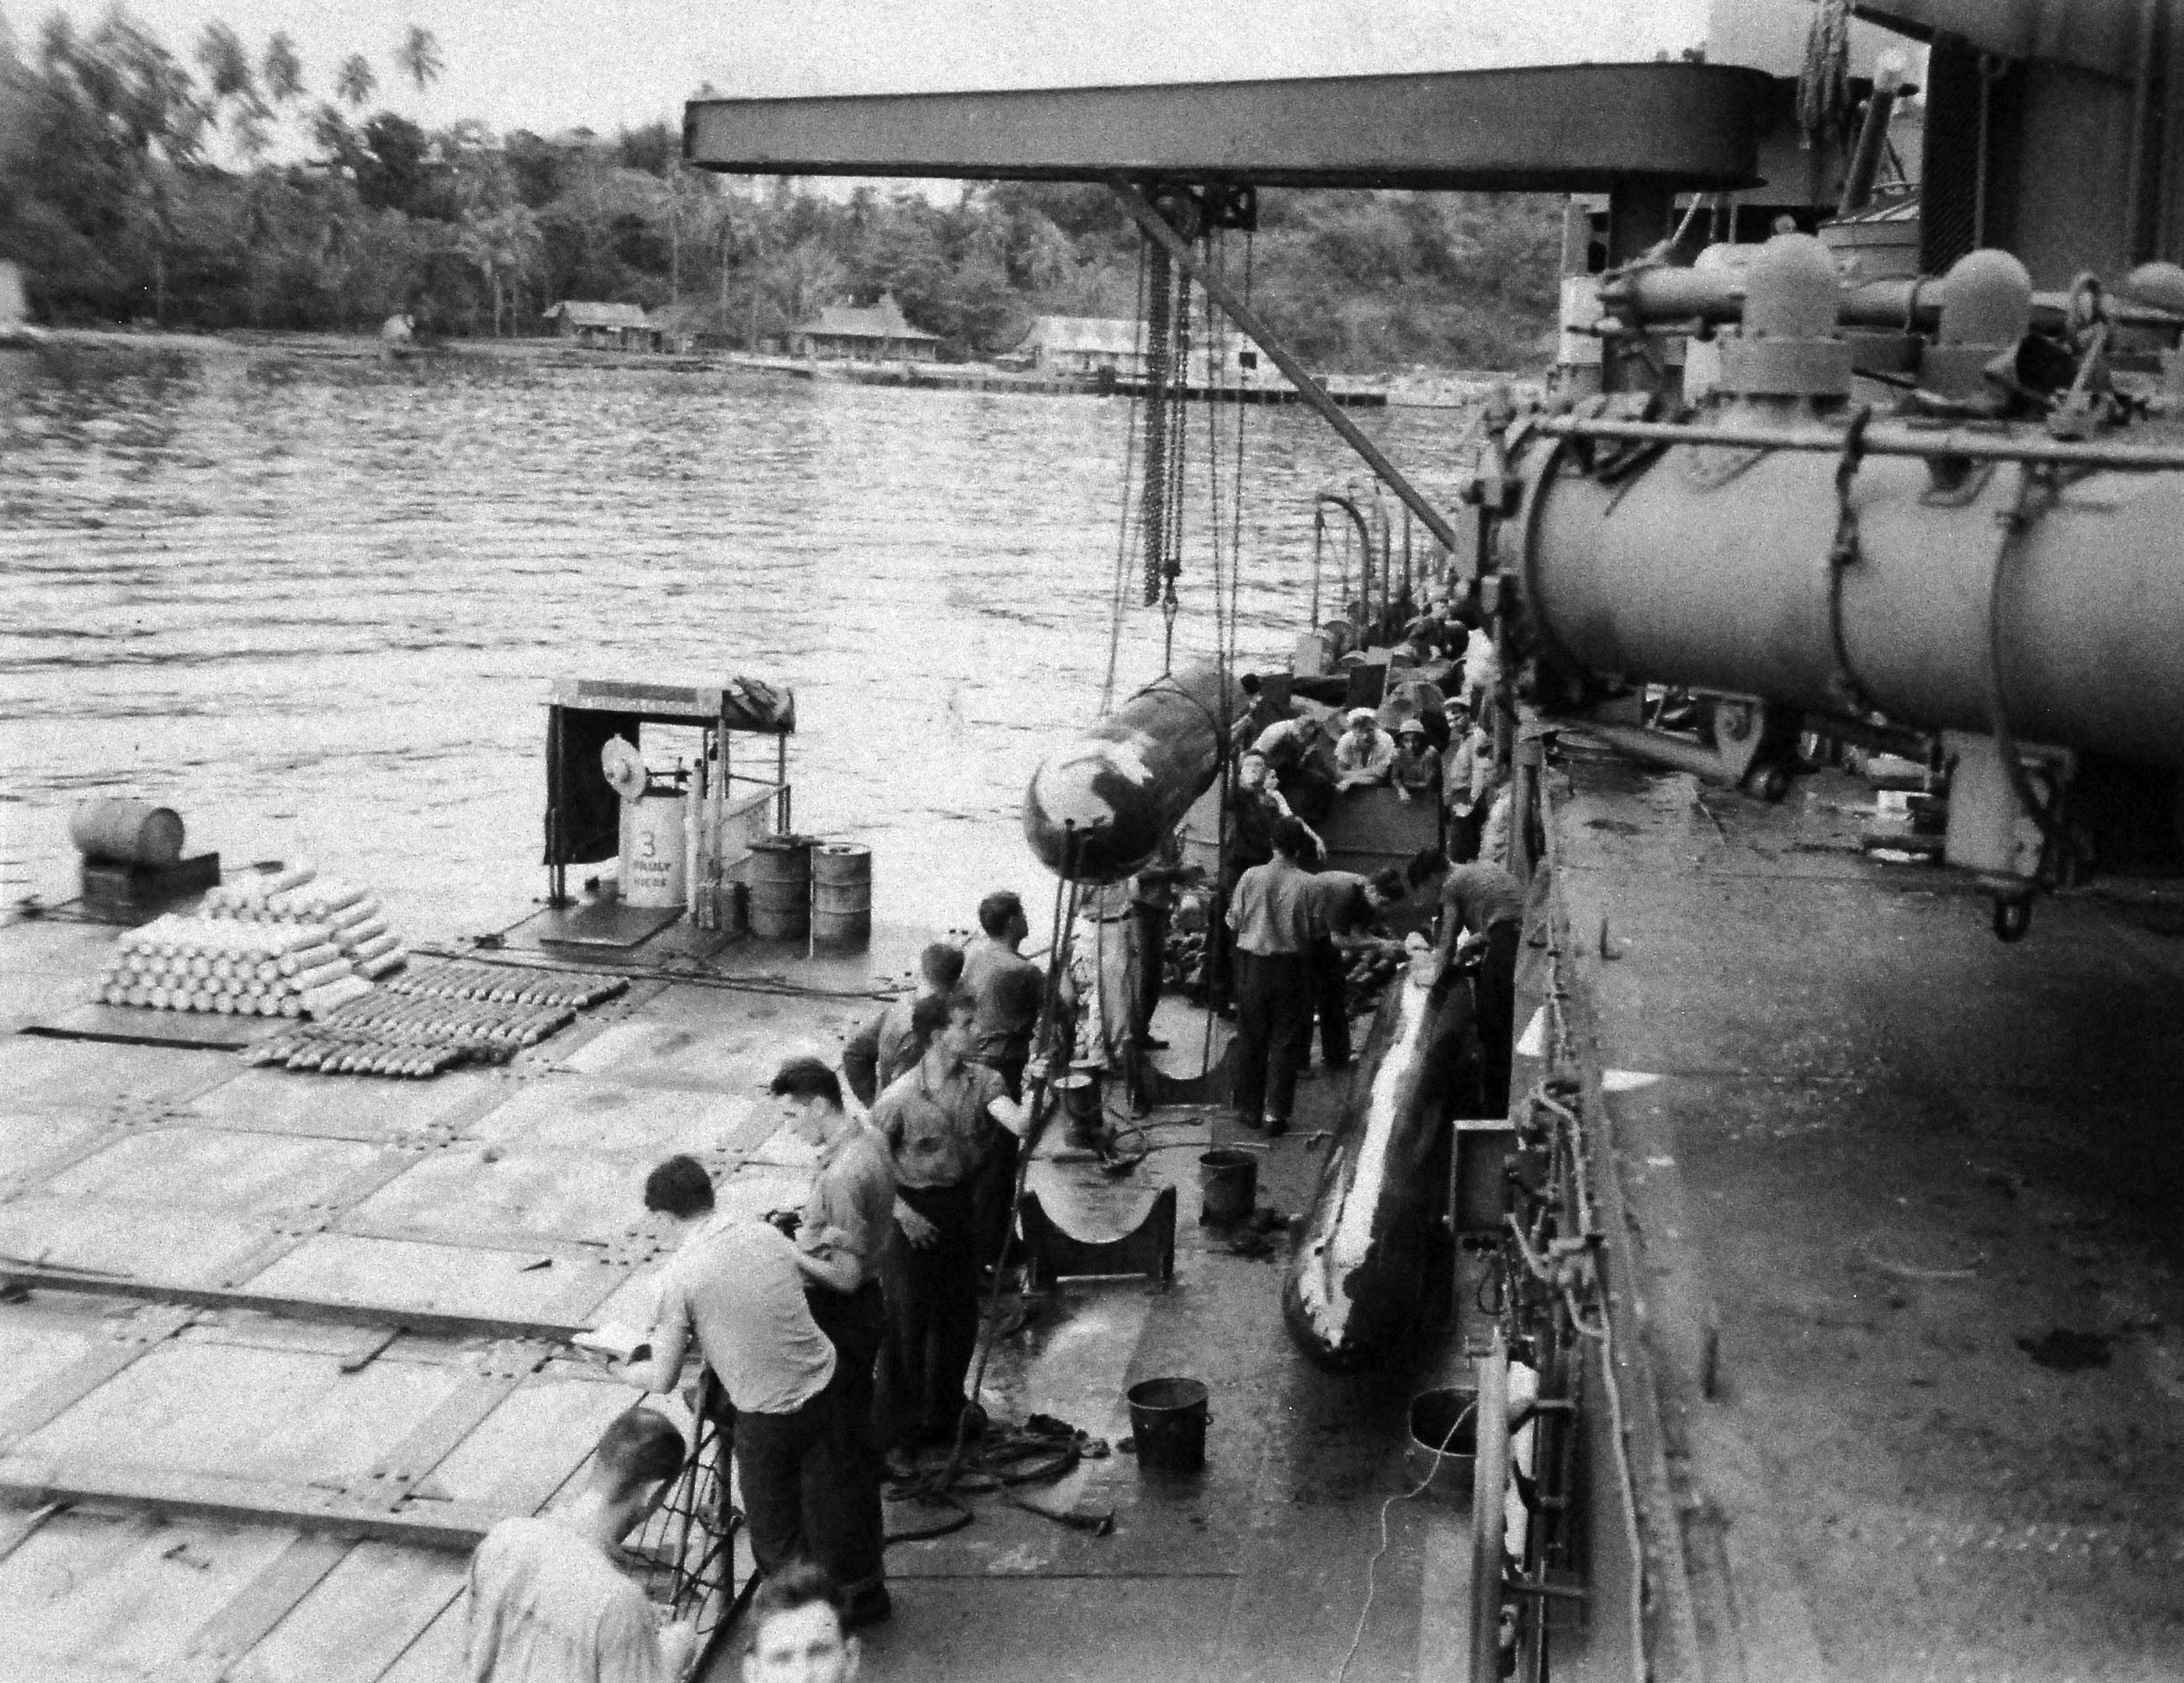 Mark XV torpedoes being transferred to the USS Nicholas from the USS Patterson at Tulagi, Solomon Islands, 14 Jul 1943 following the Battle of Kolombangara. Photo 1 of 2.